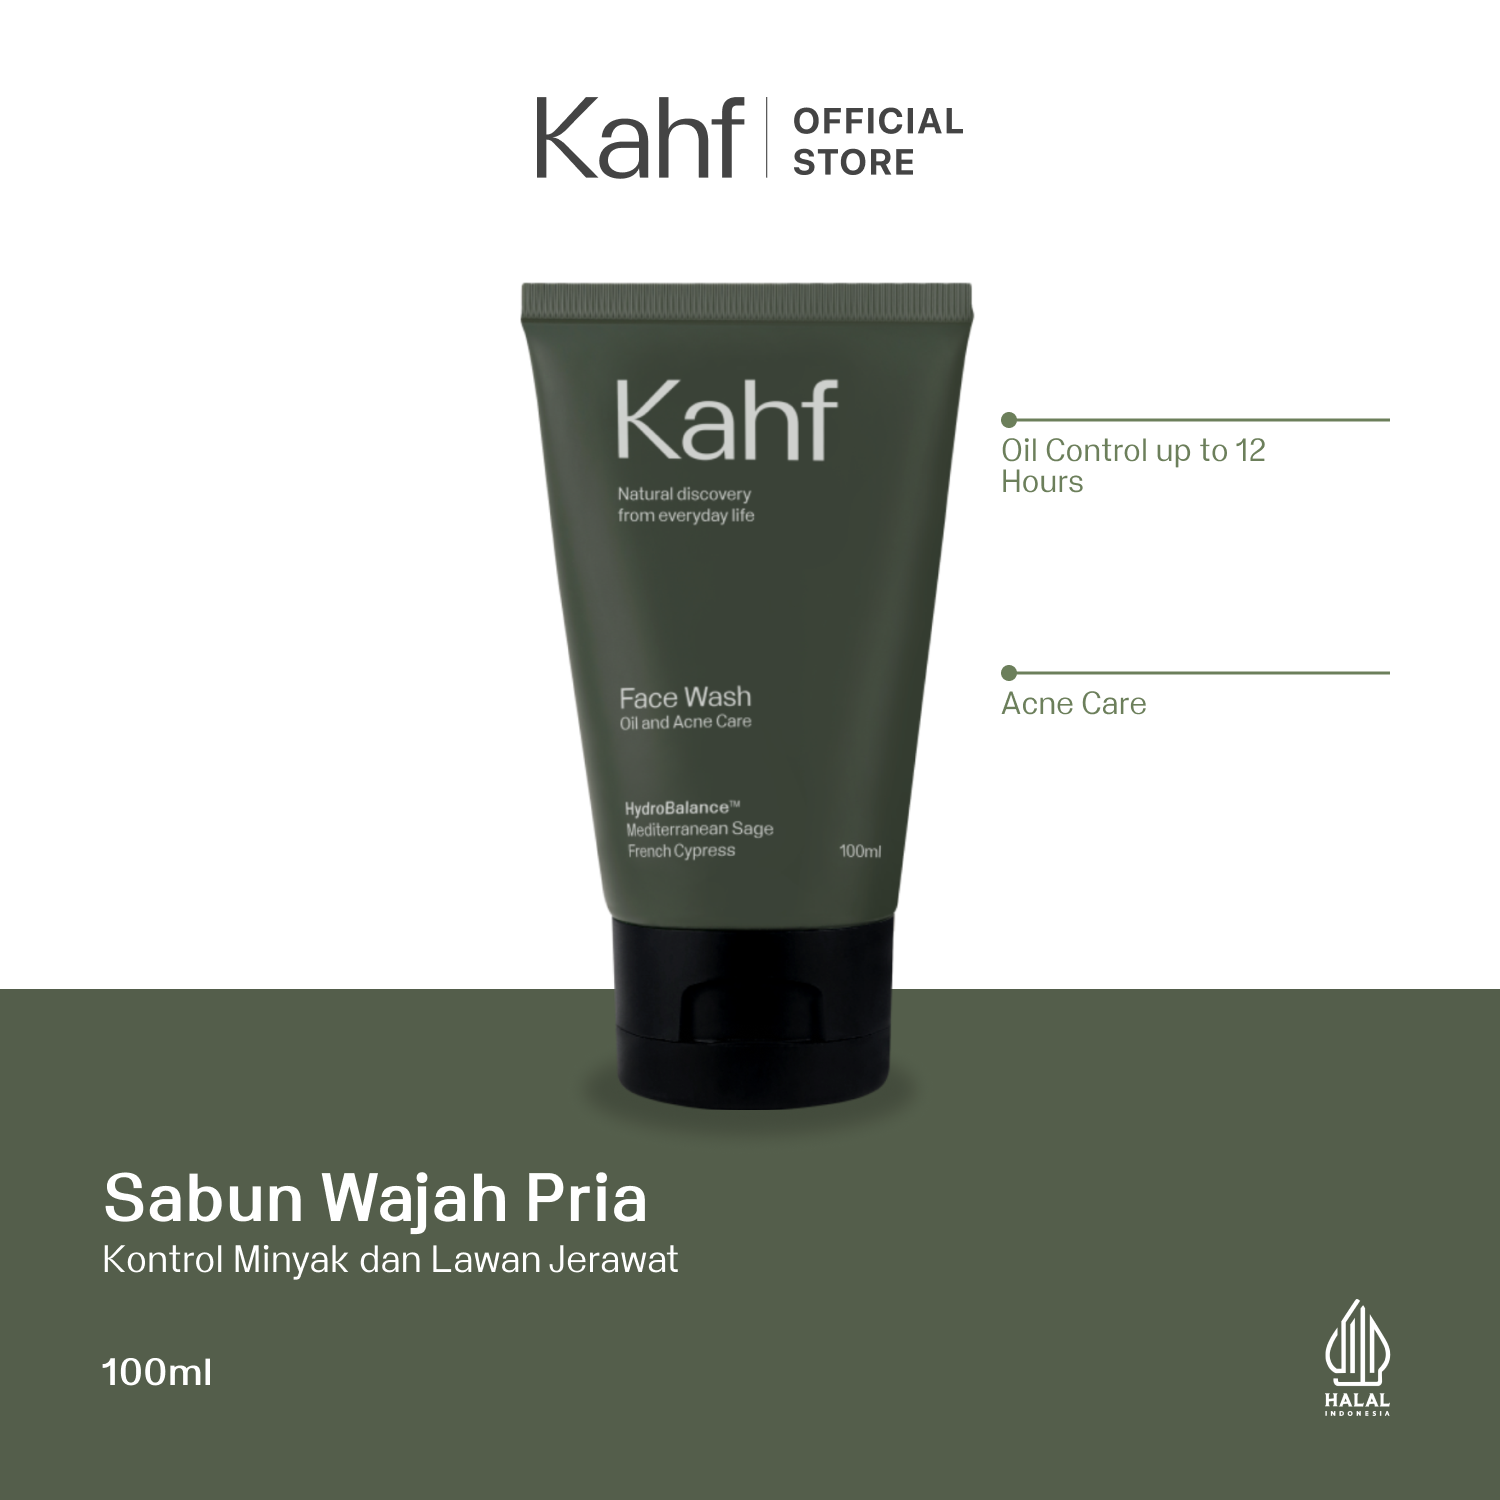 Kahf Oil and Acne Care Face Wash